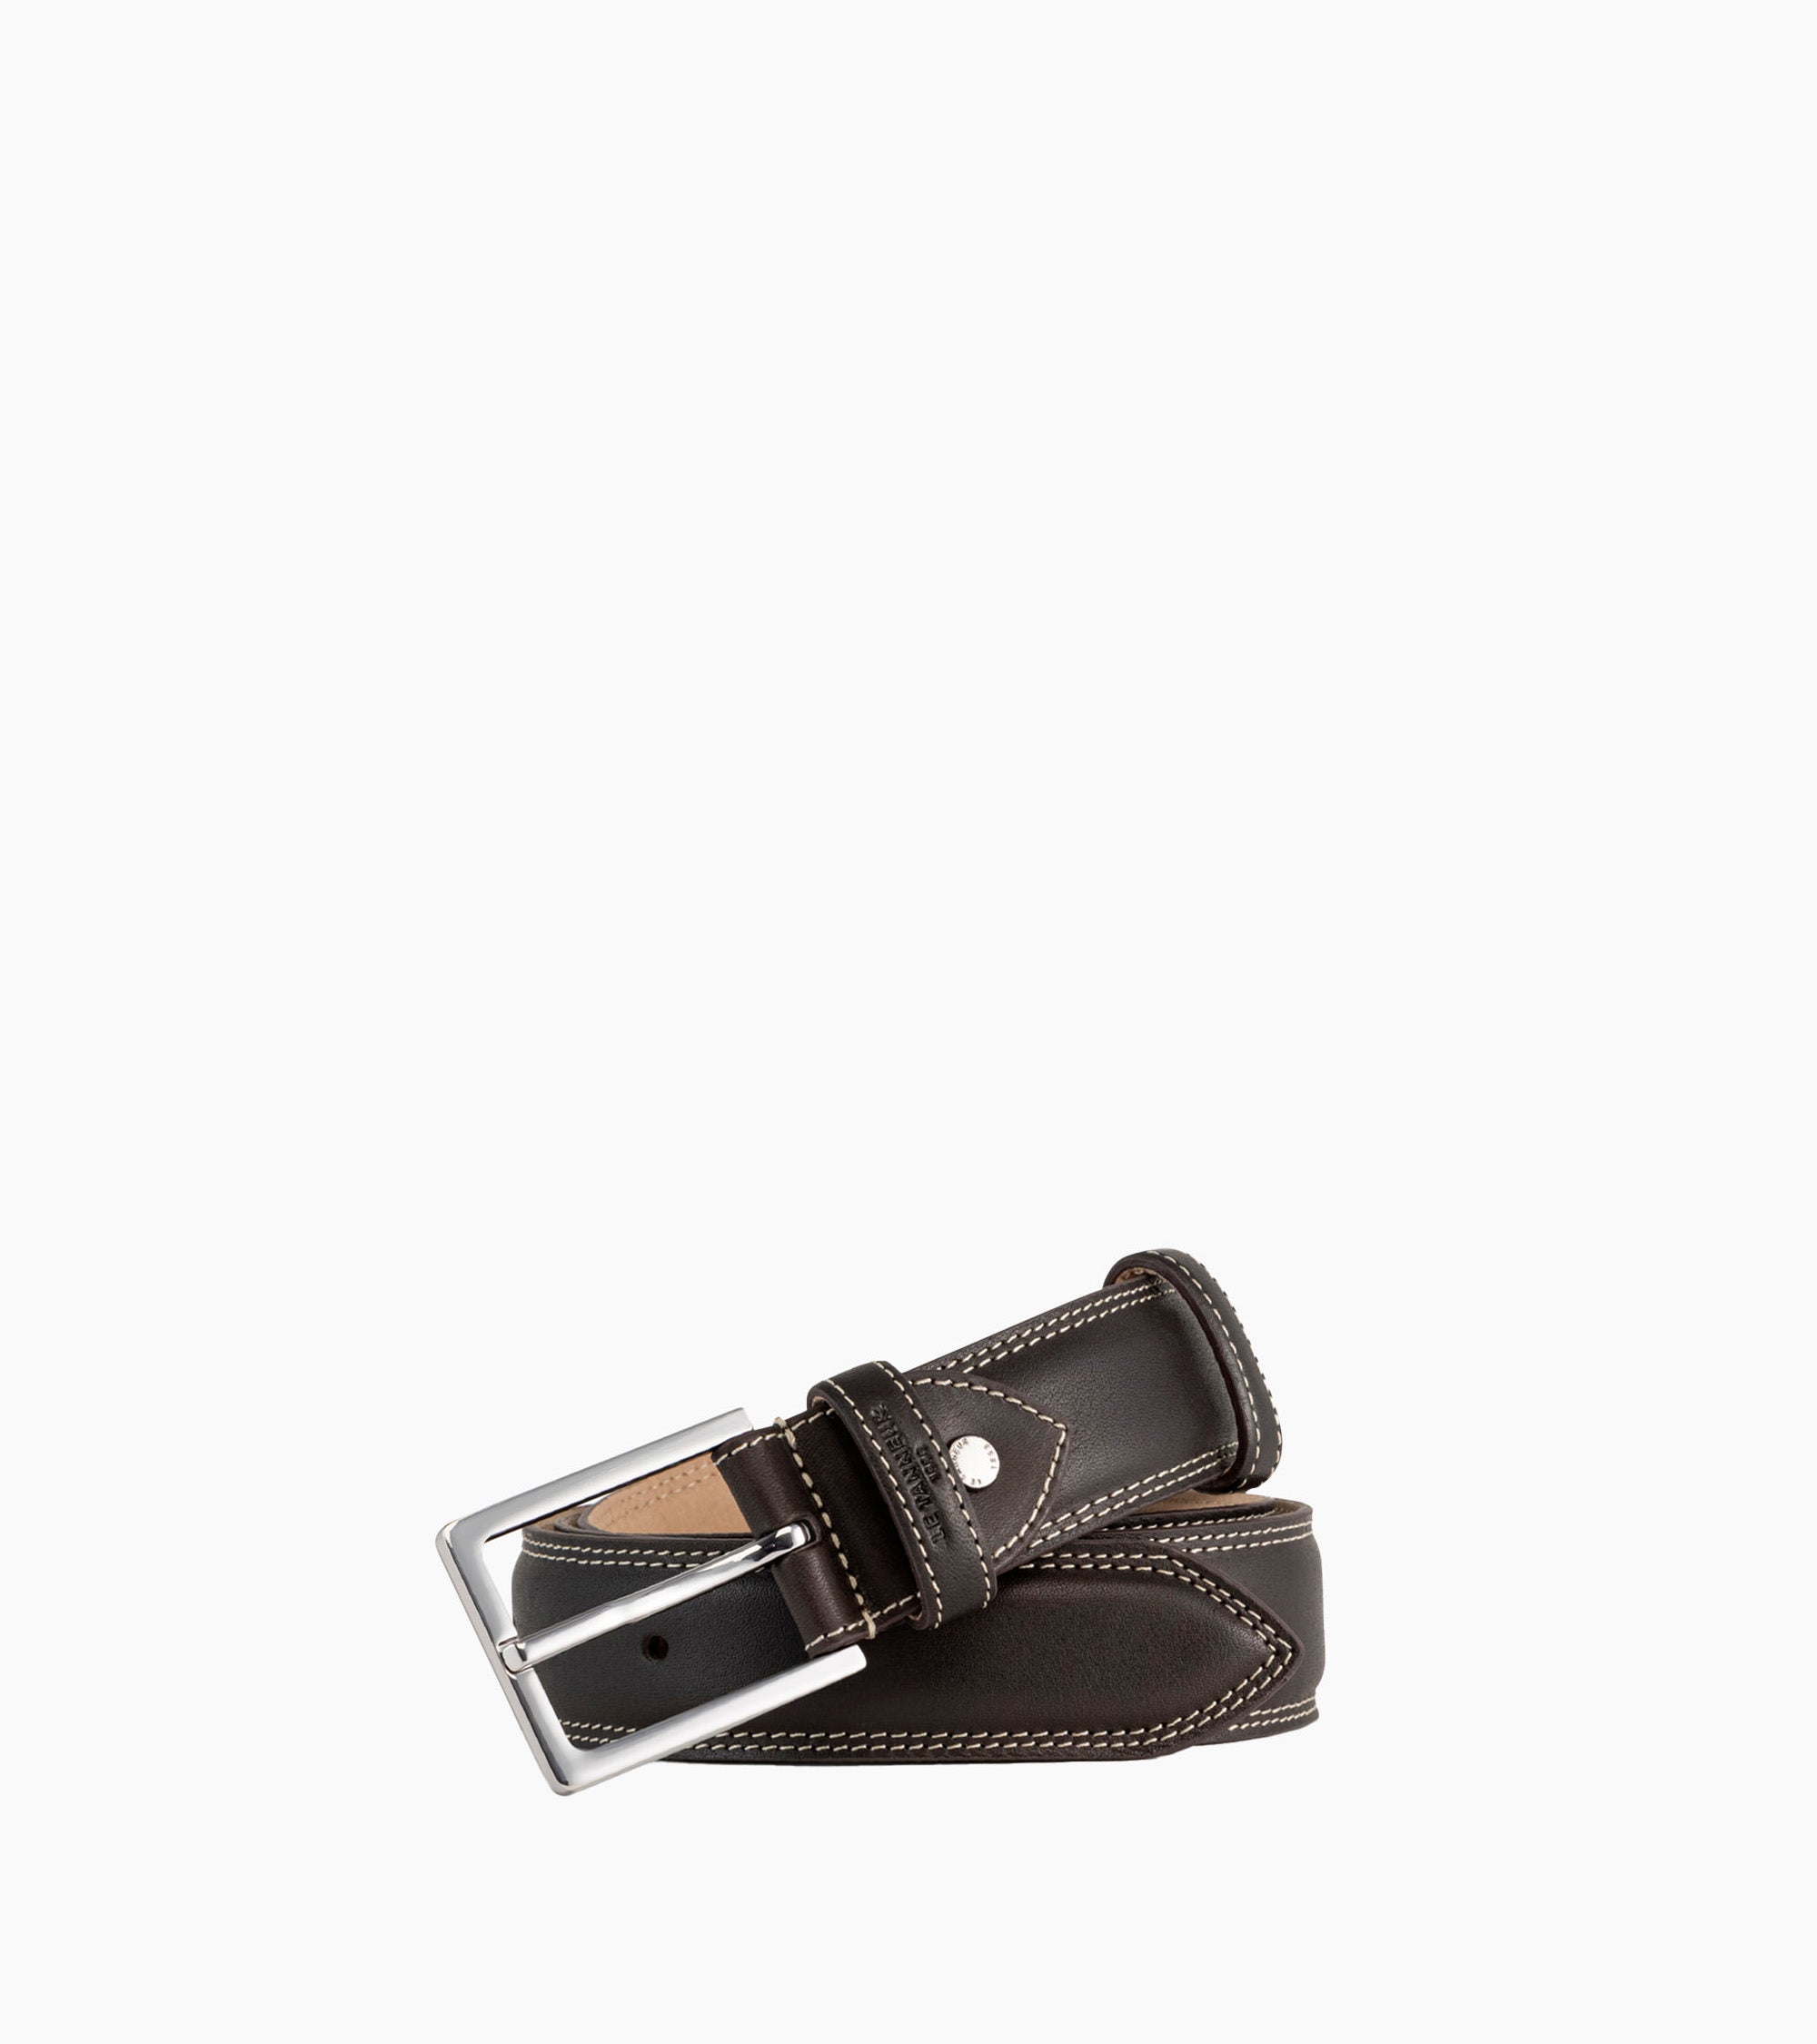 Vegetable tanned men's leather Martin belt with square buckle